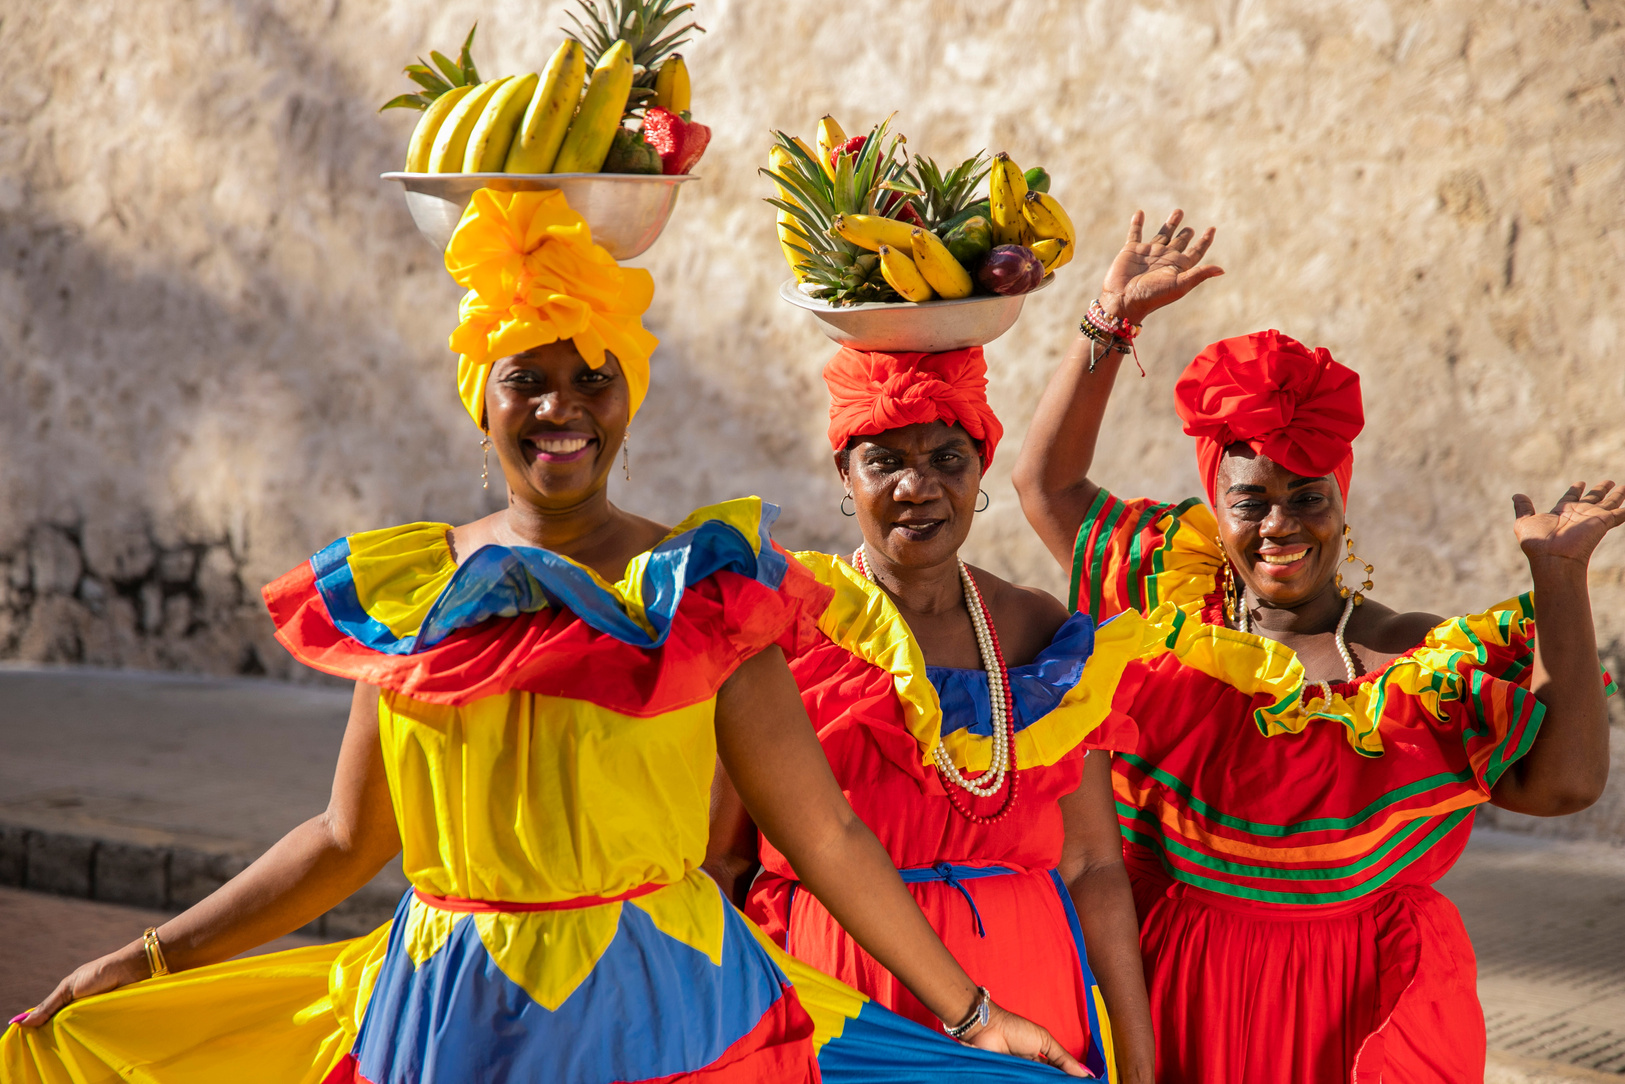 Women in Bright Colorful Dresses with Fruit Bowls on Head